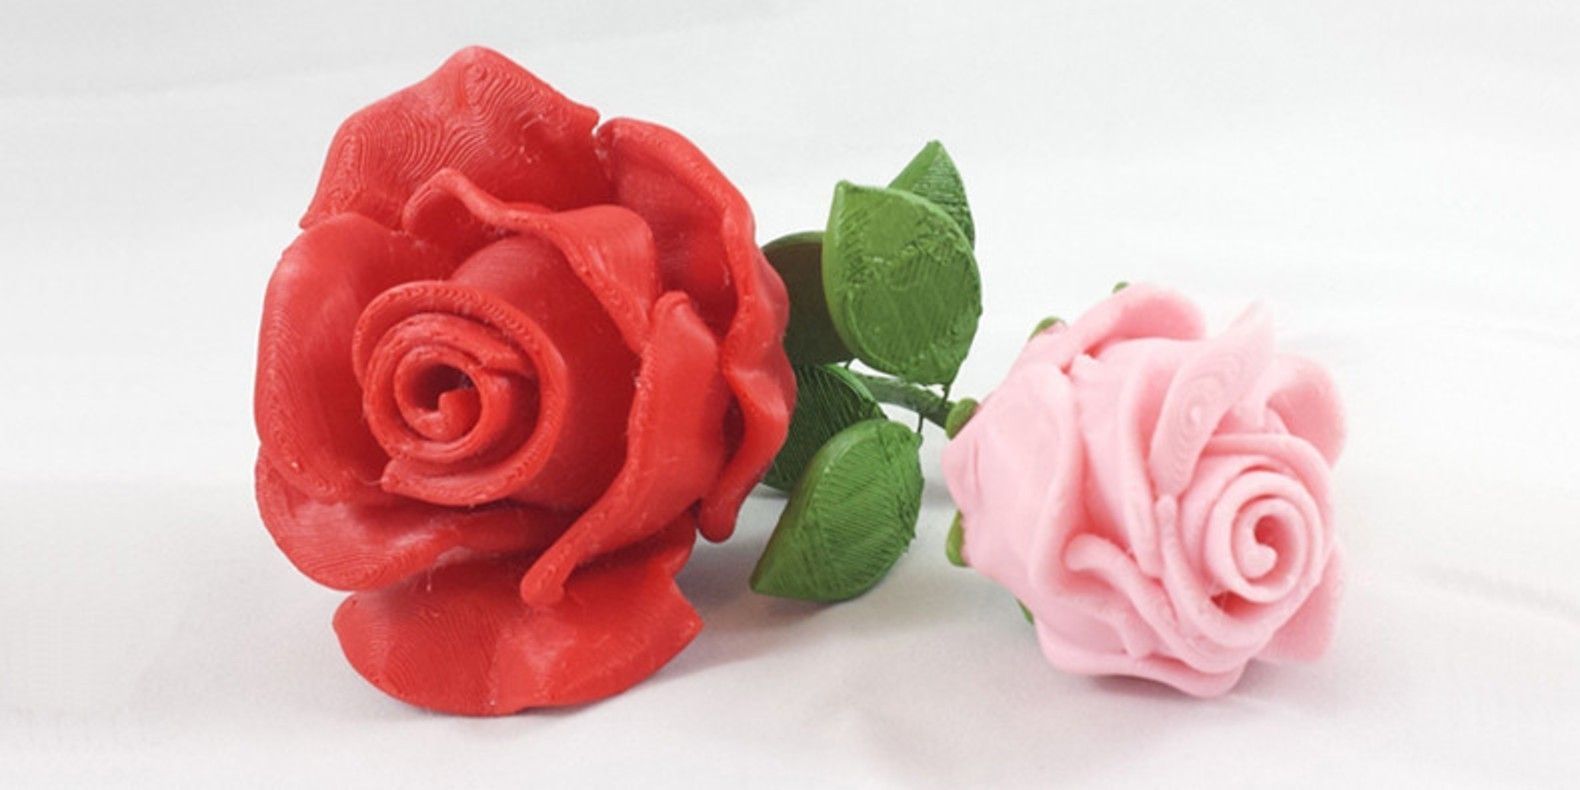 Download STL files to celebrate a 3D printing themed Valentine's Day